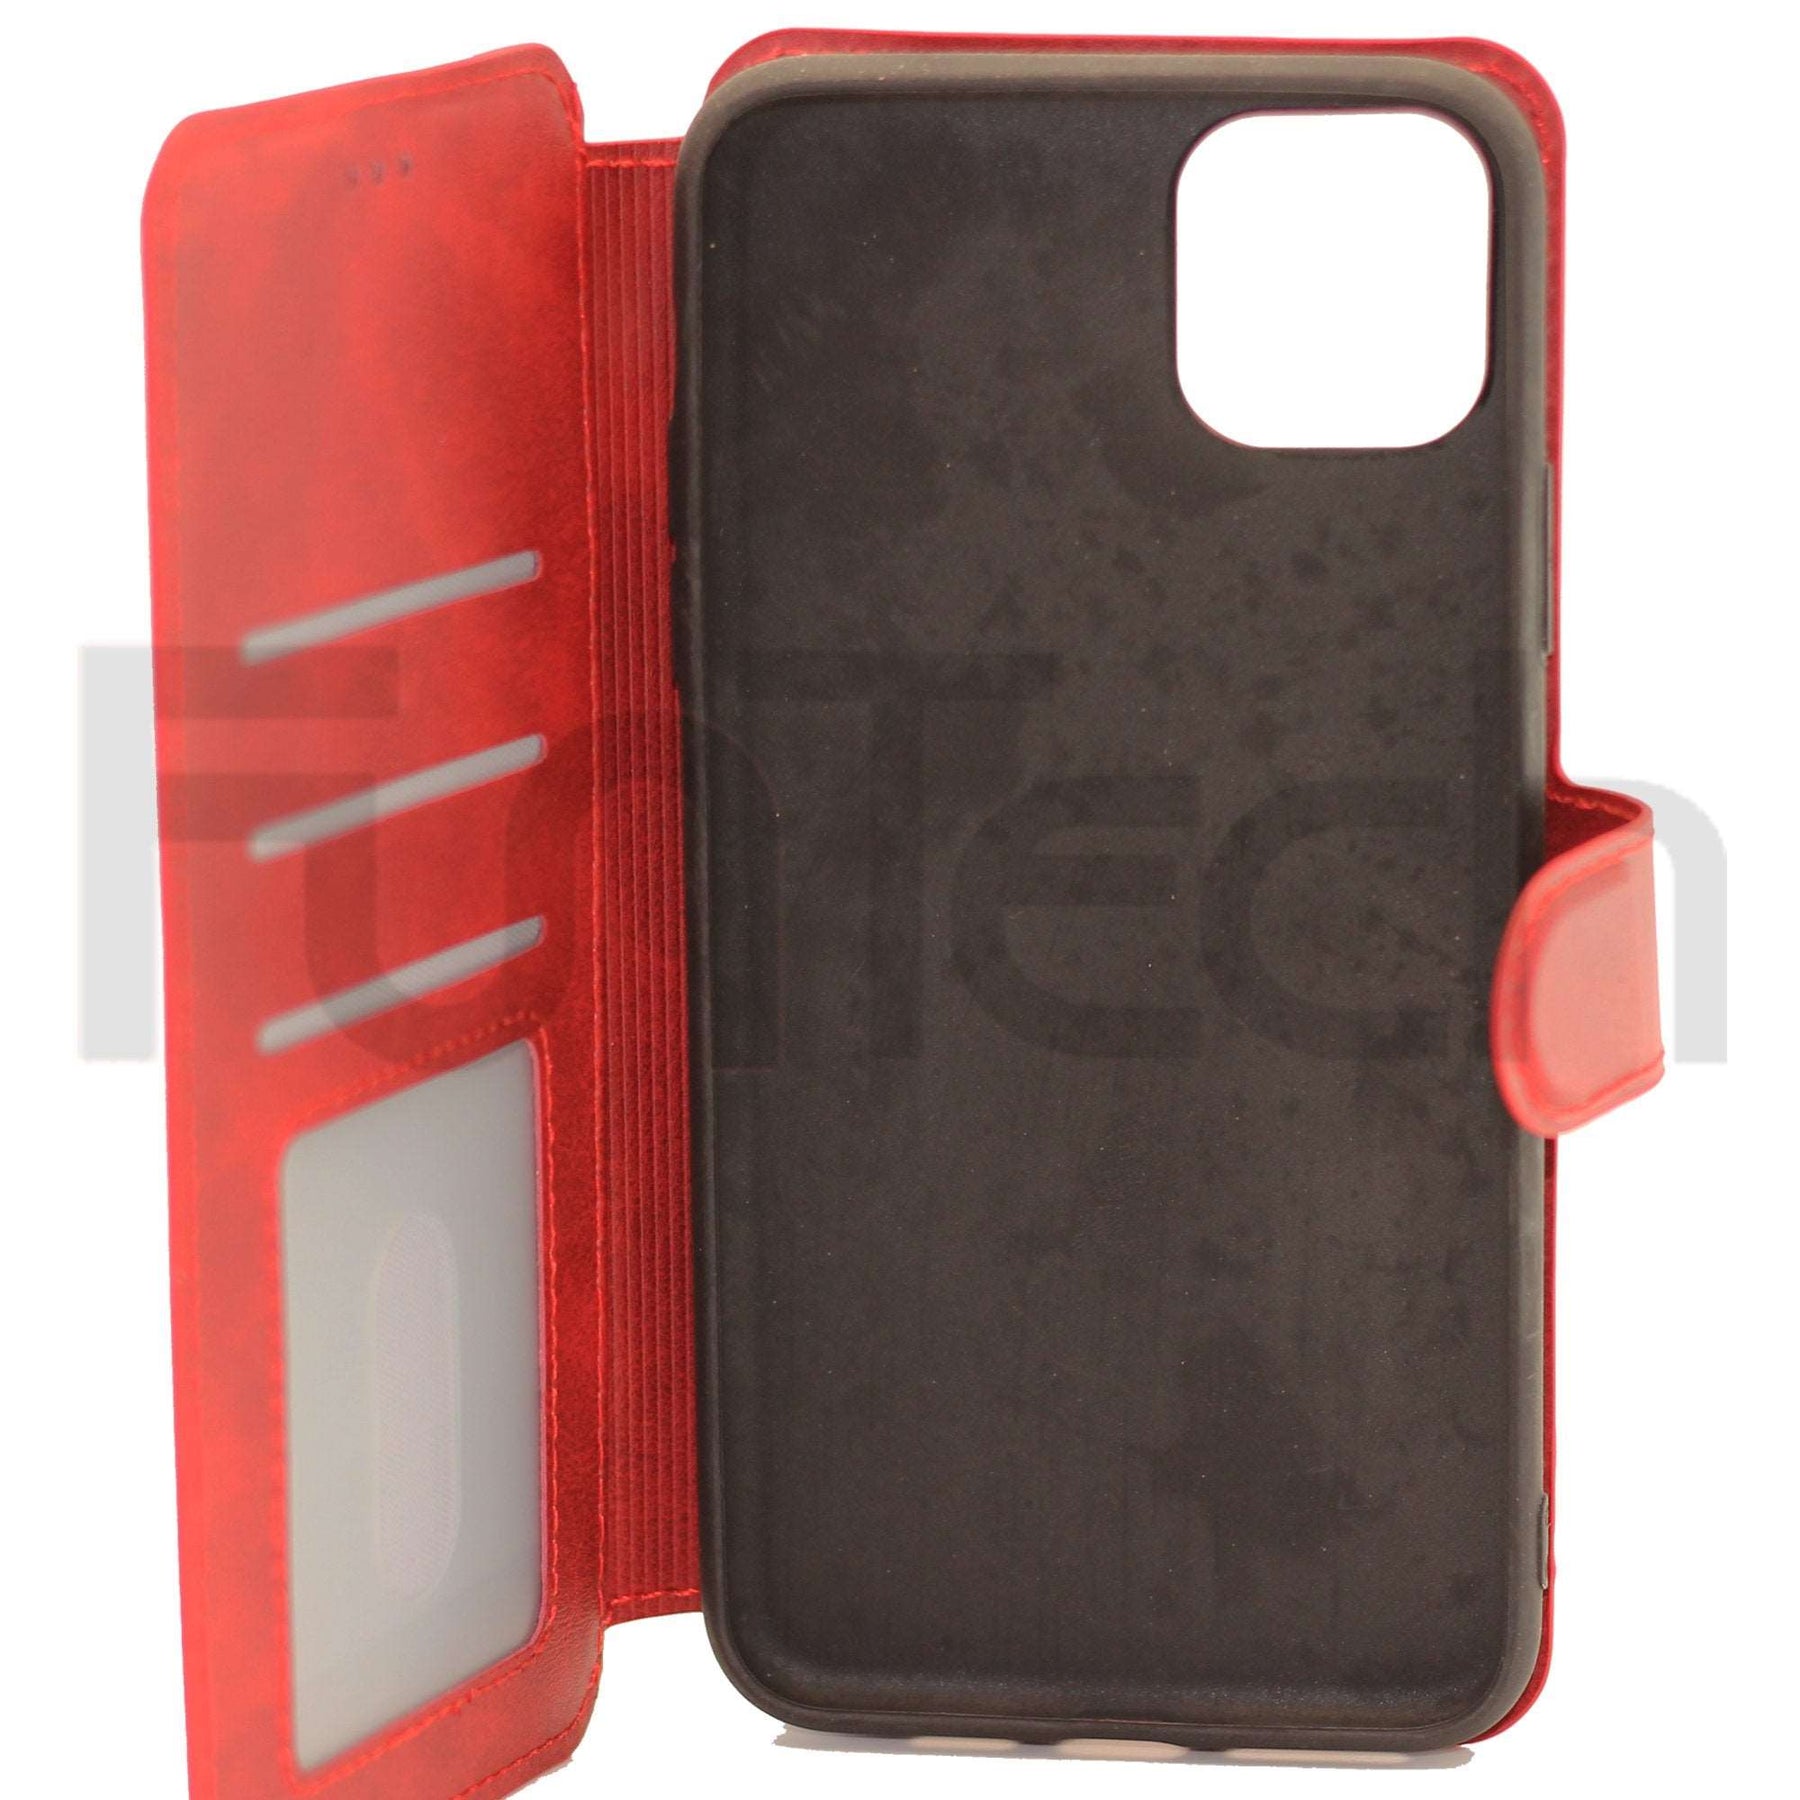  Apple iPhone 11 Pro MAX Leather Wallet Case Color Red